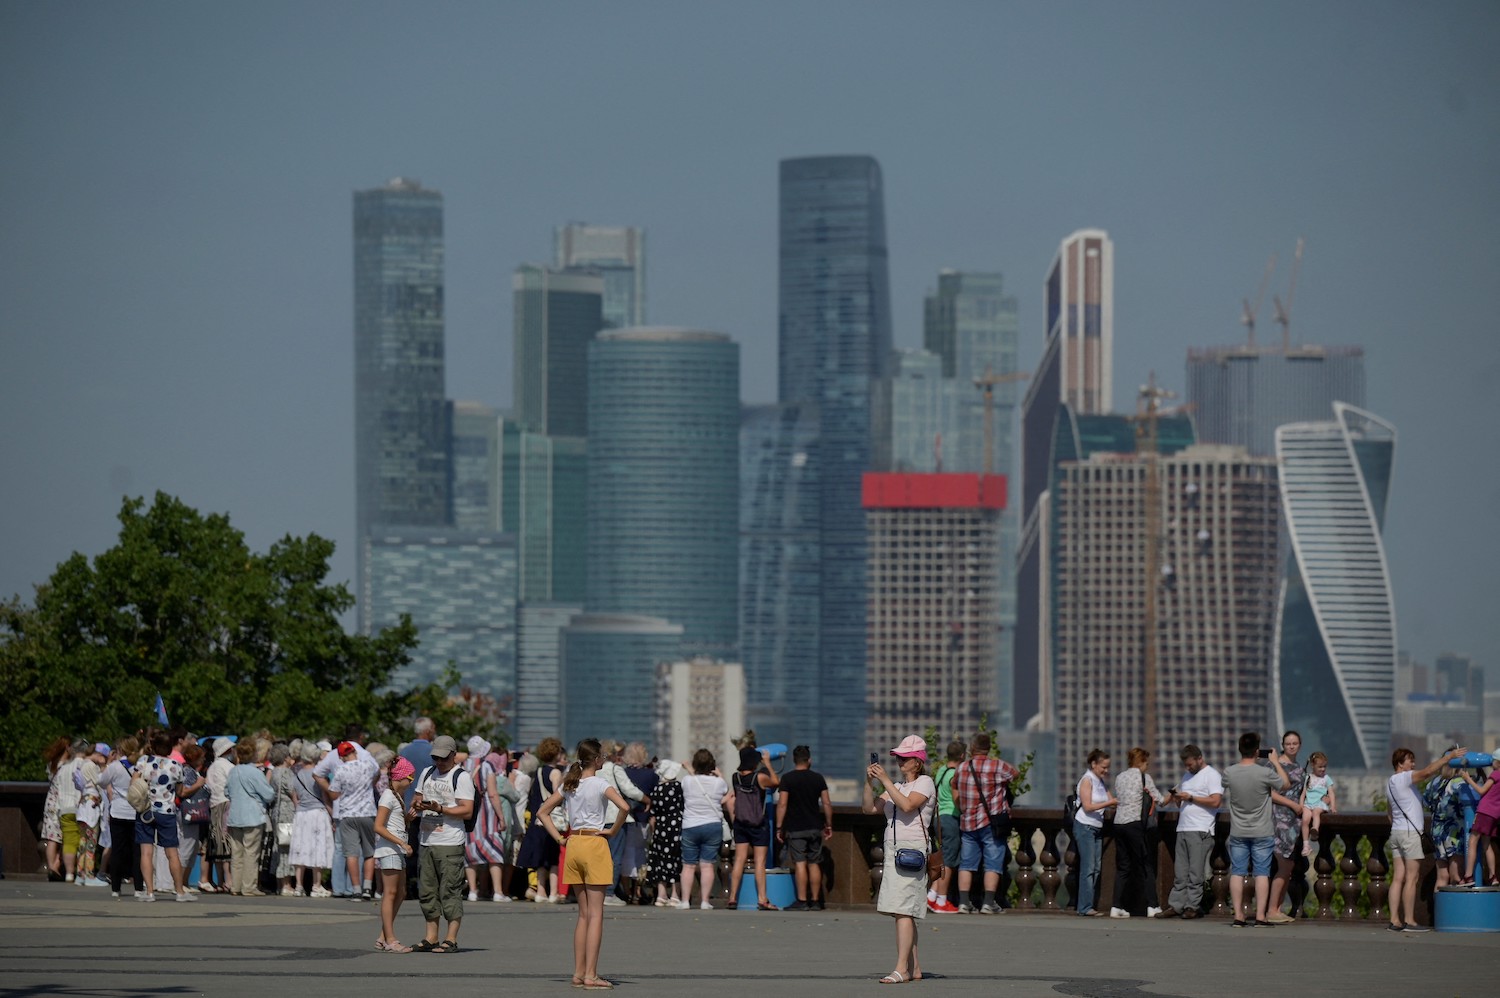 Visitors view the Moscow skyline from the Vorobyovy Hills observation point during a hot summer day in Moscow on Aug. 18.